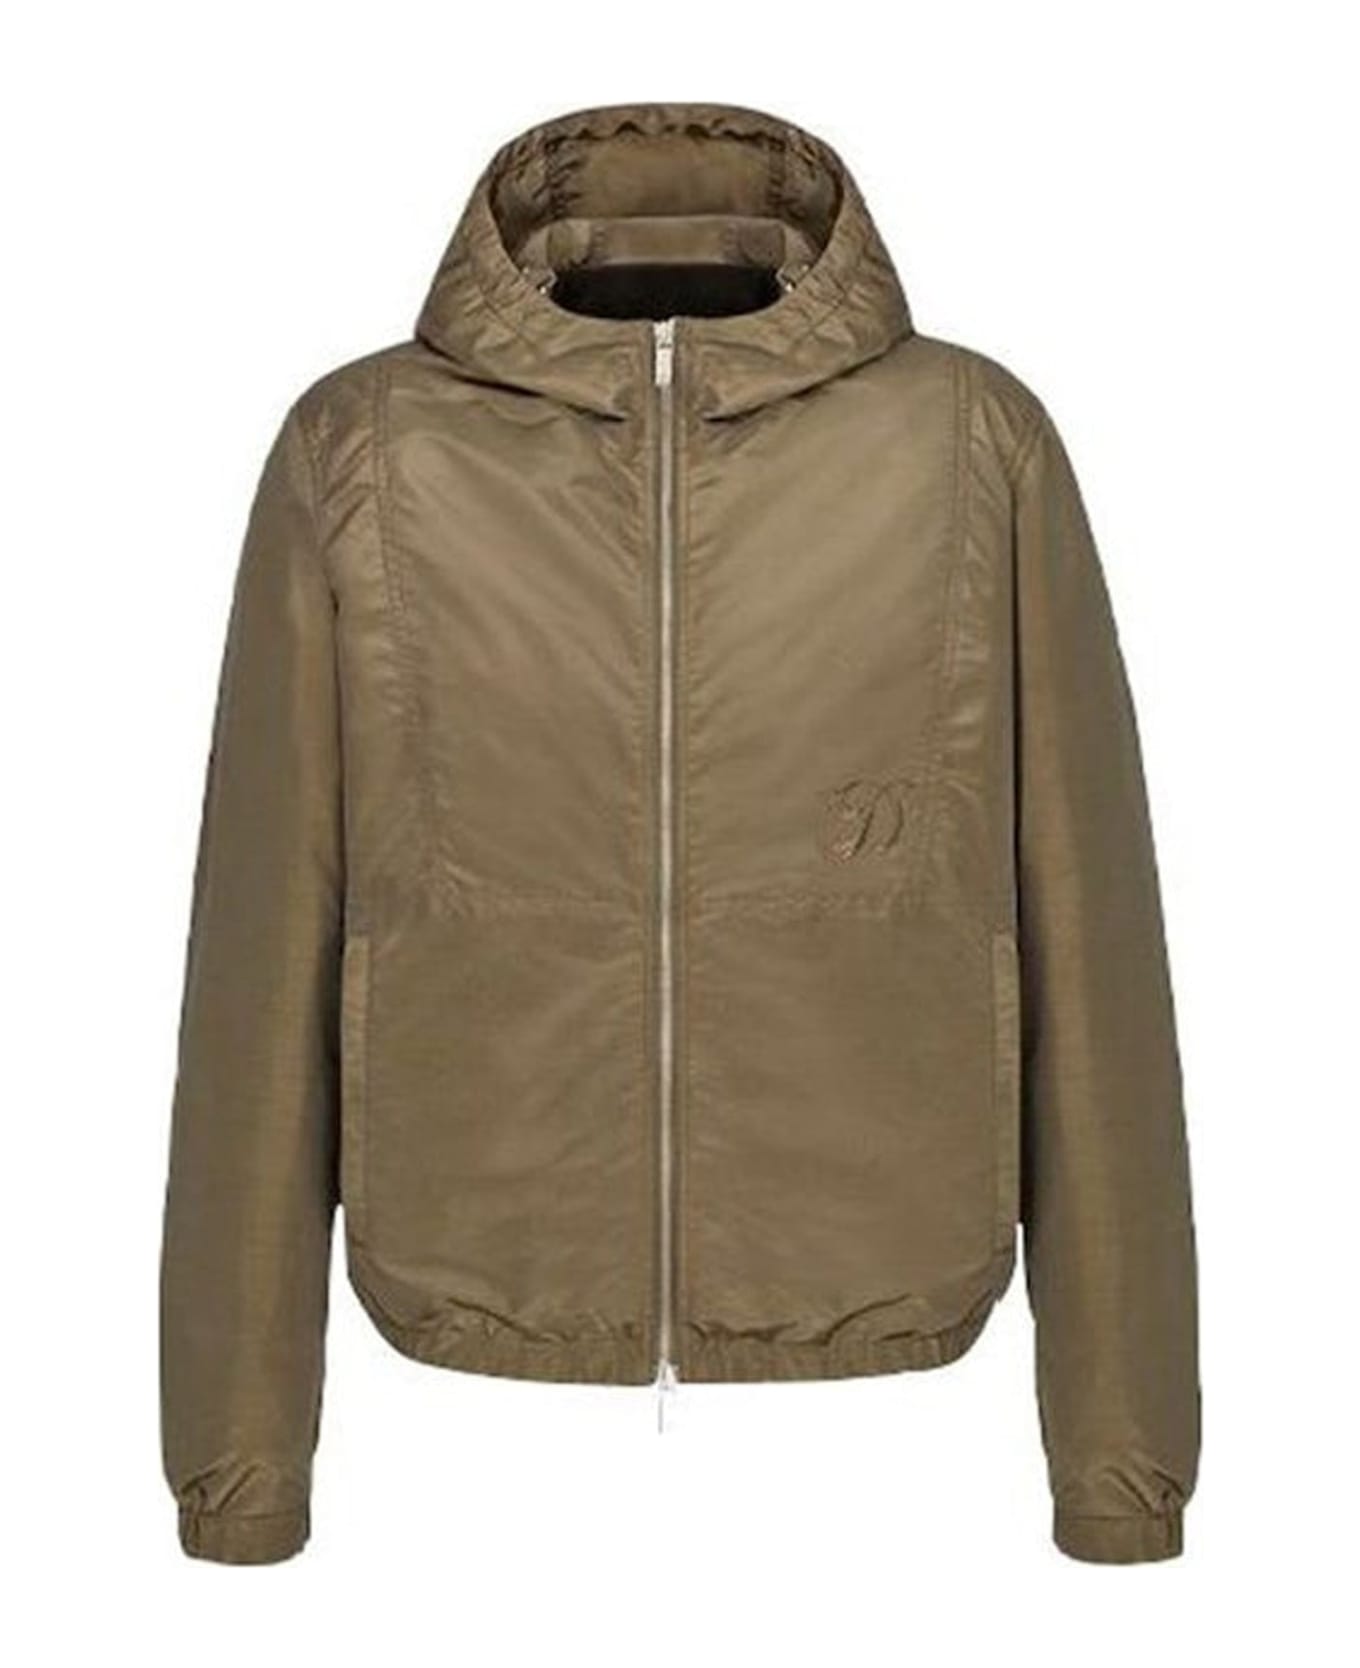 Dior X Kenny Scharf Embroidered Logo Hooded Jacket - Green ジャケット